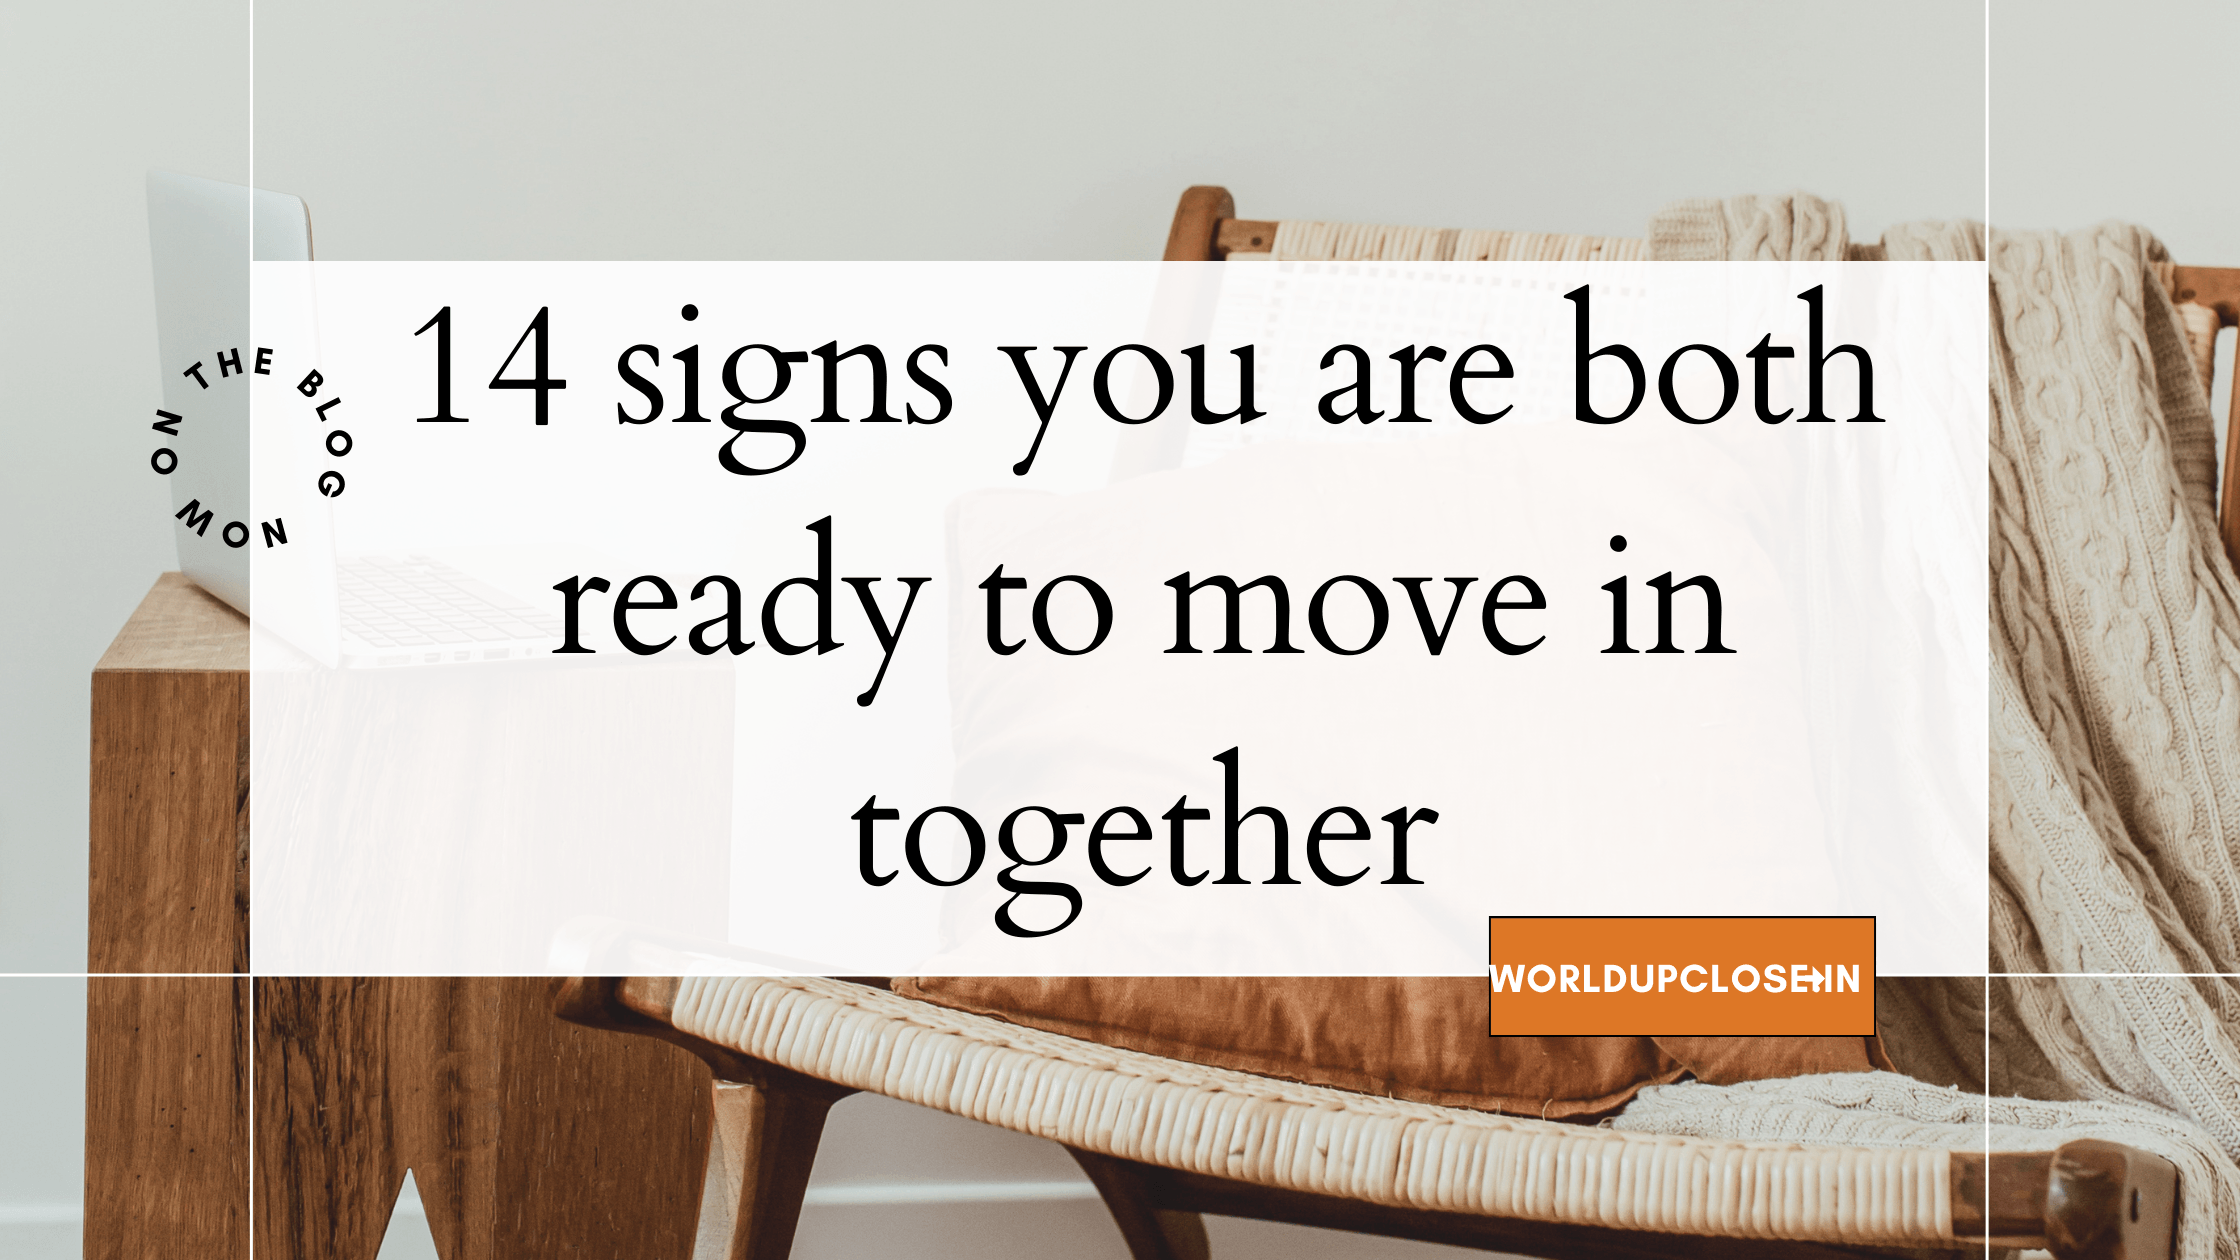 14 signs you are both ready to move in together 43